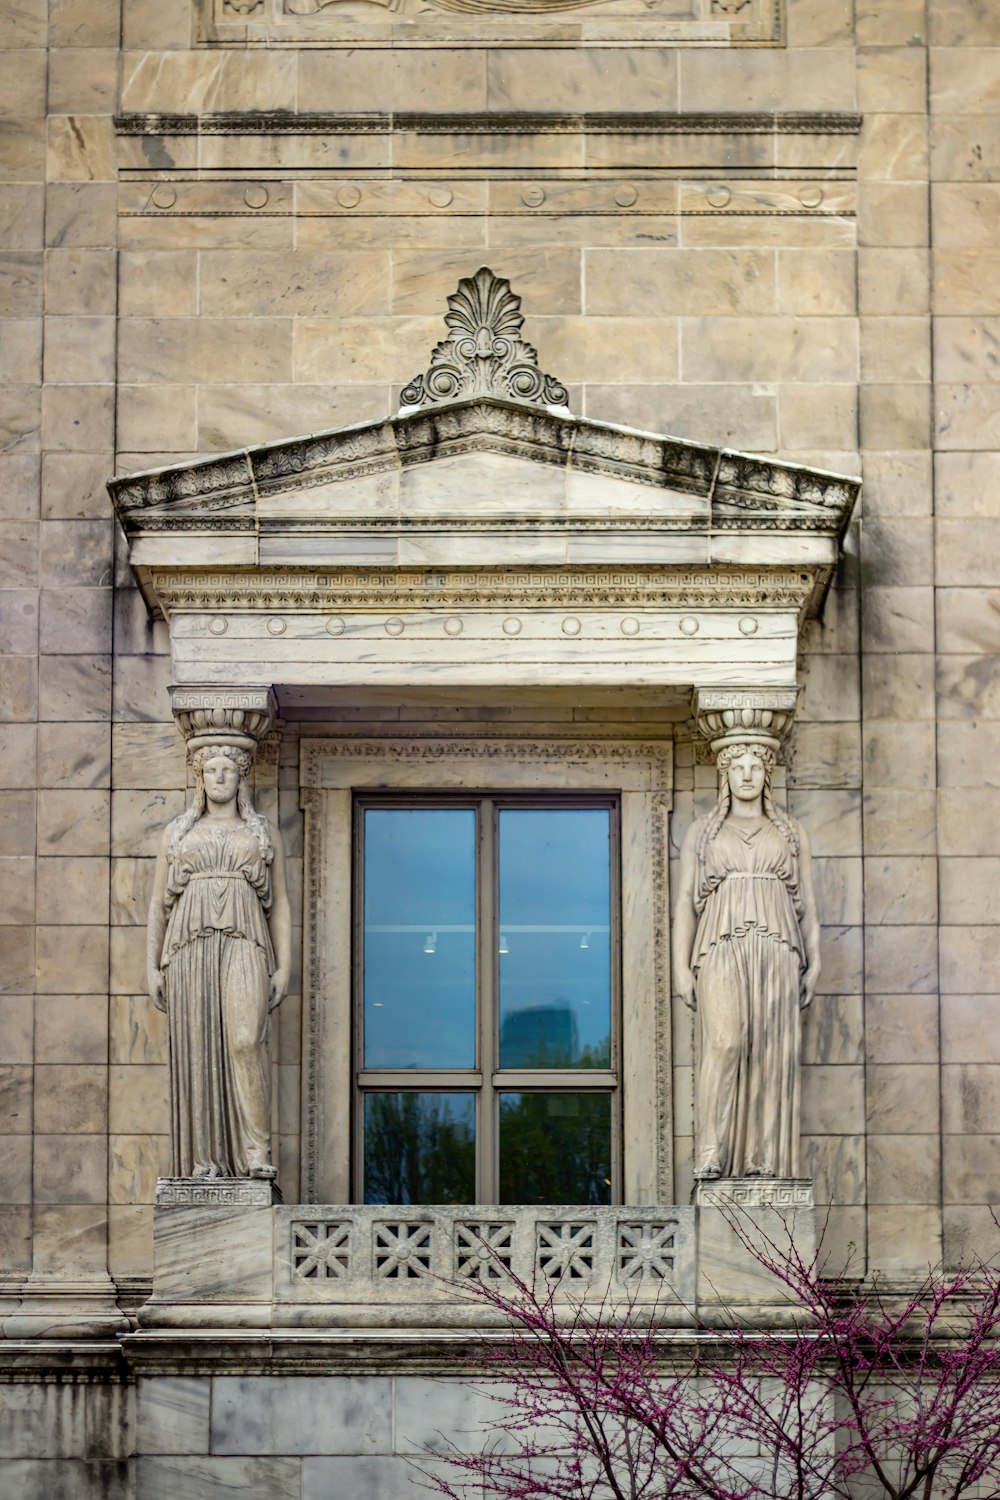 a window with statues on the side of it